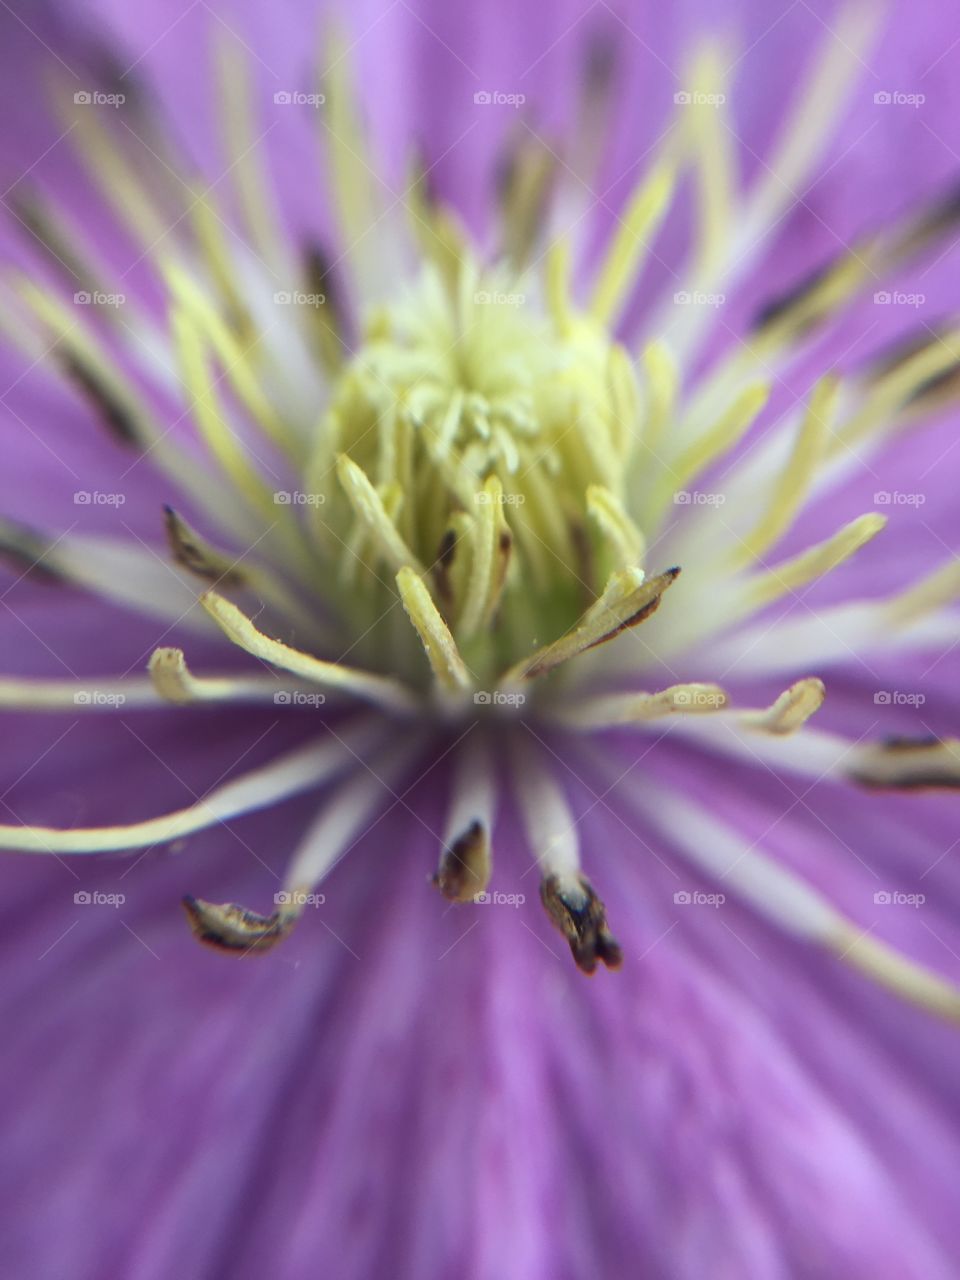 A bees view to a flower